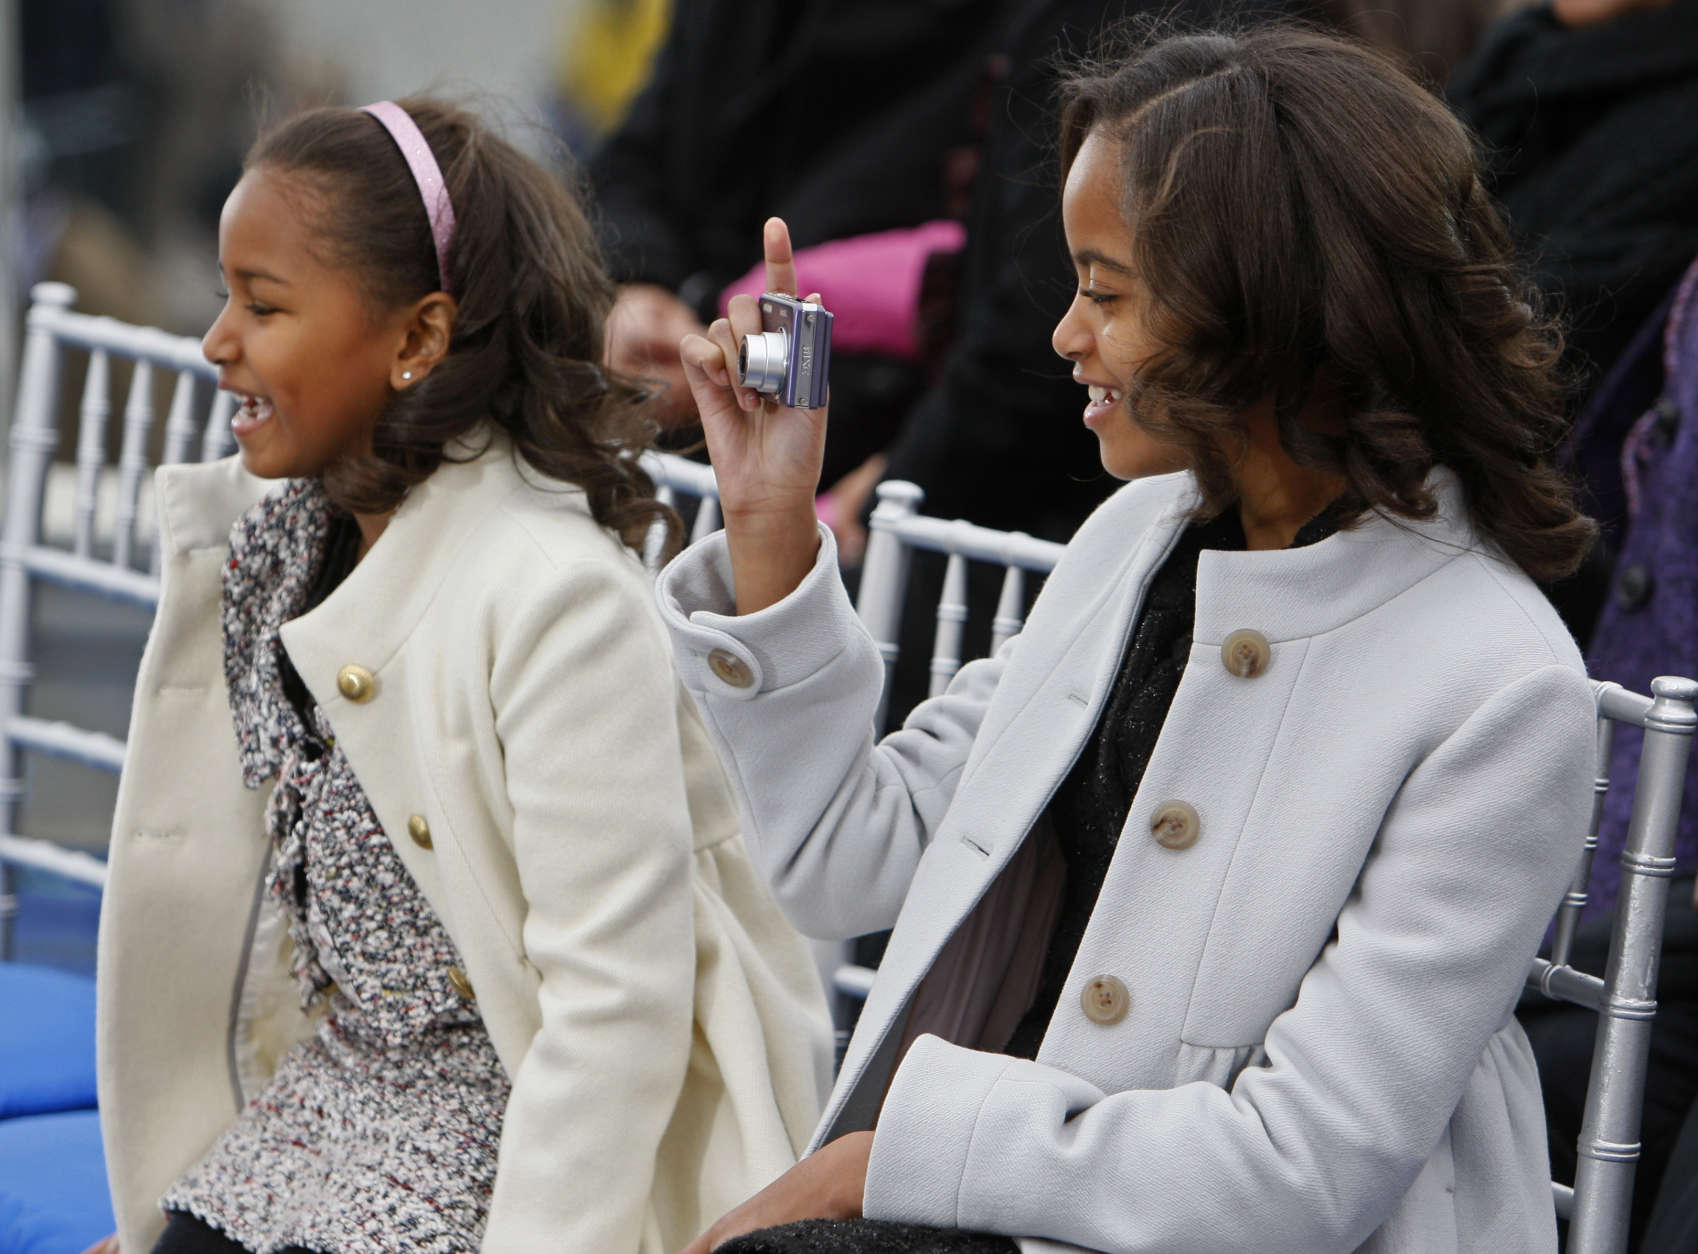 Malia Obama, 10, right, takes a picture as she sits next to her sister Sasha before their parents, President-elect Barack Obama and Michelle Obama, arrive onstage at the Lincoln Memorial inaugural concert Sunday, Jan. 18, 2009. (AP Photo/Charles Dharapak)